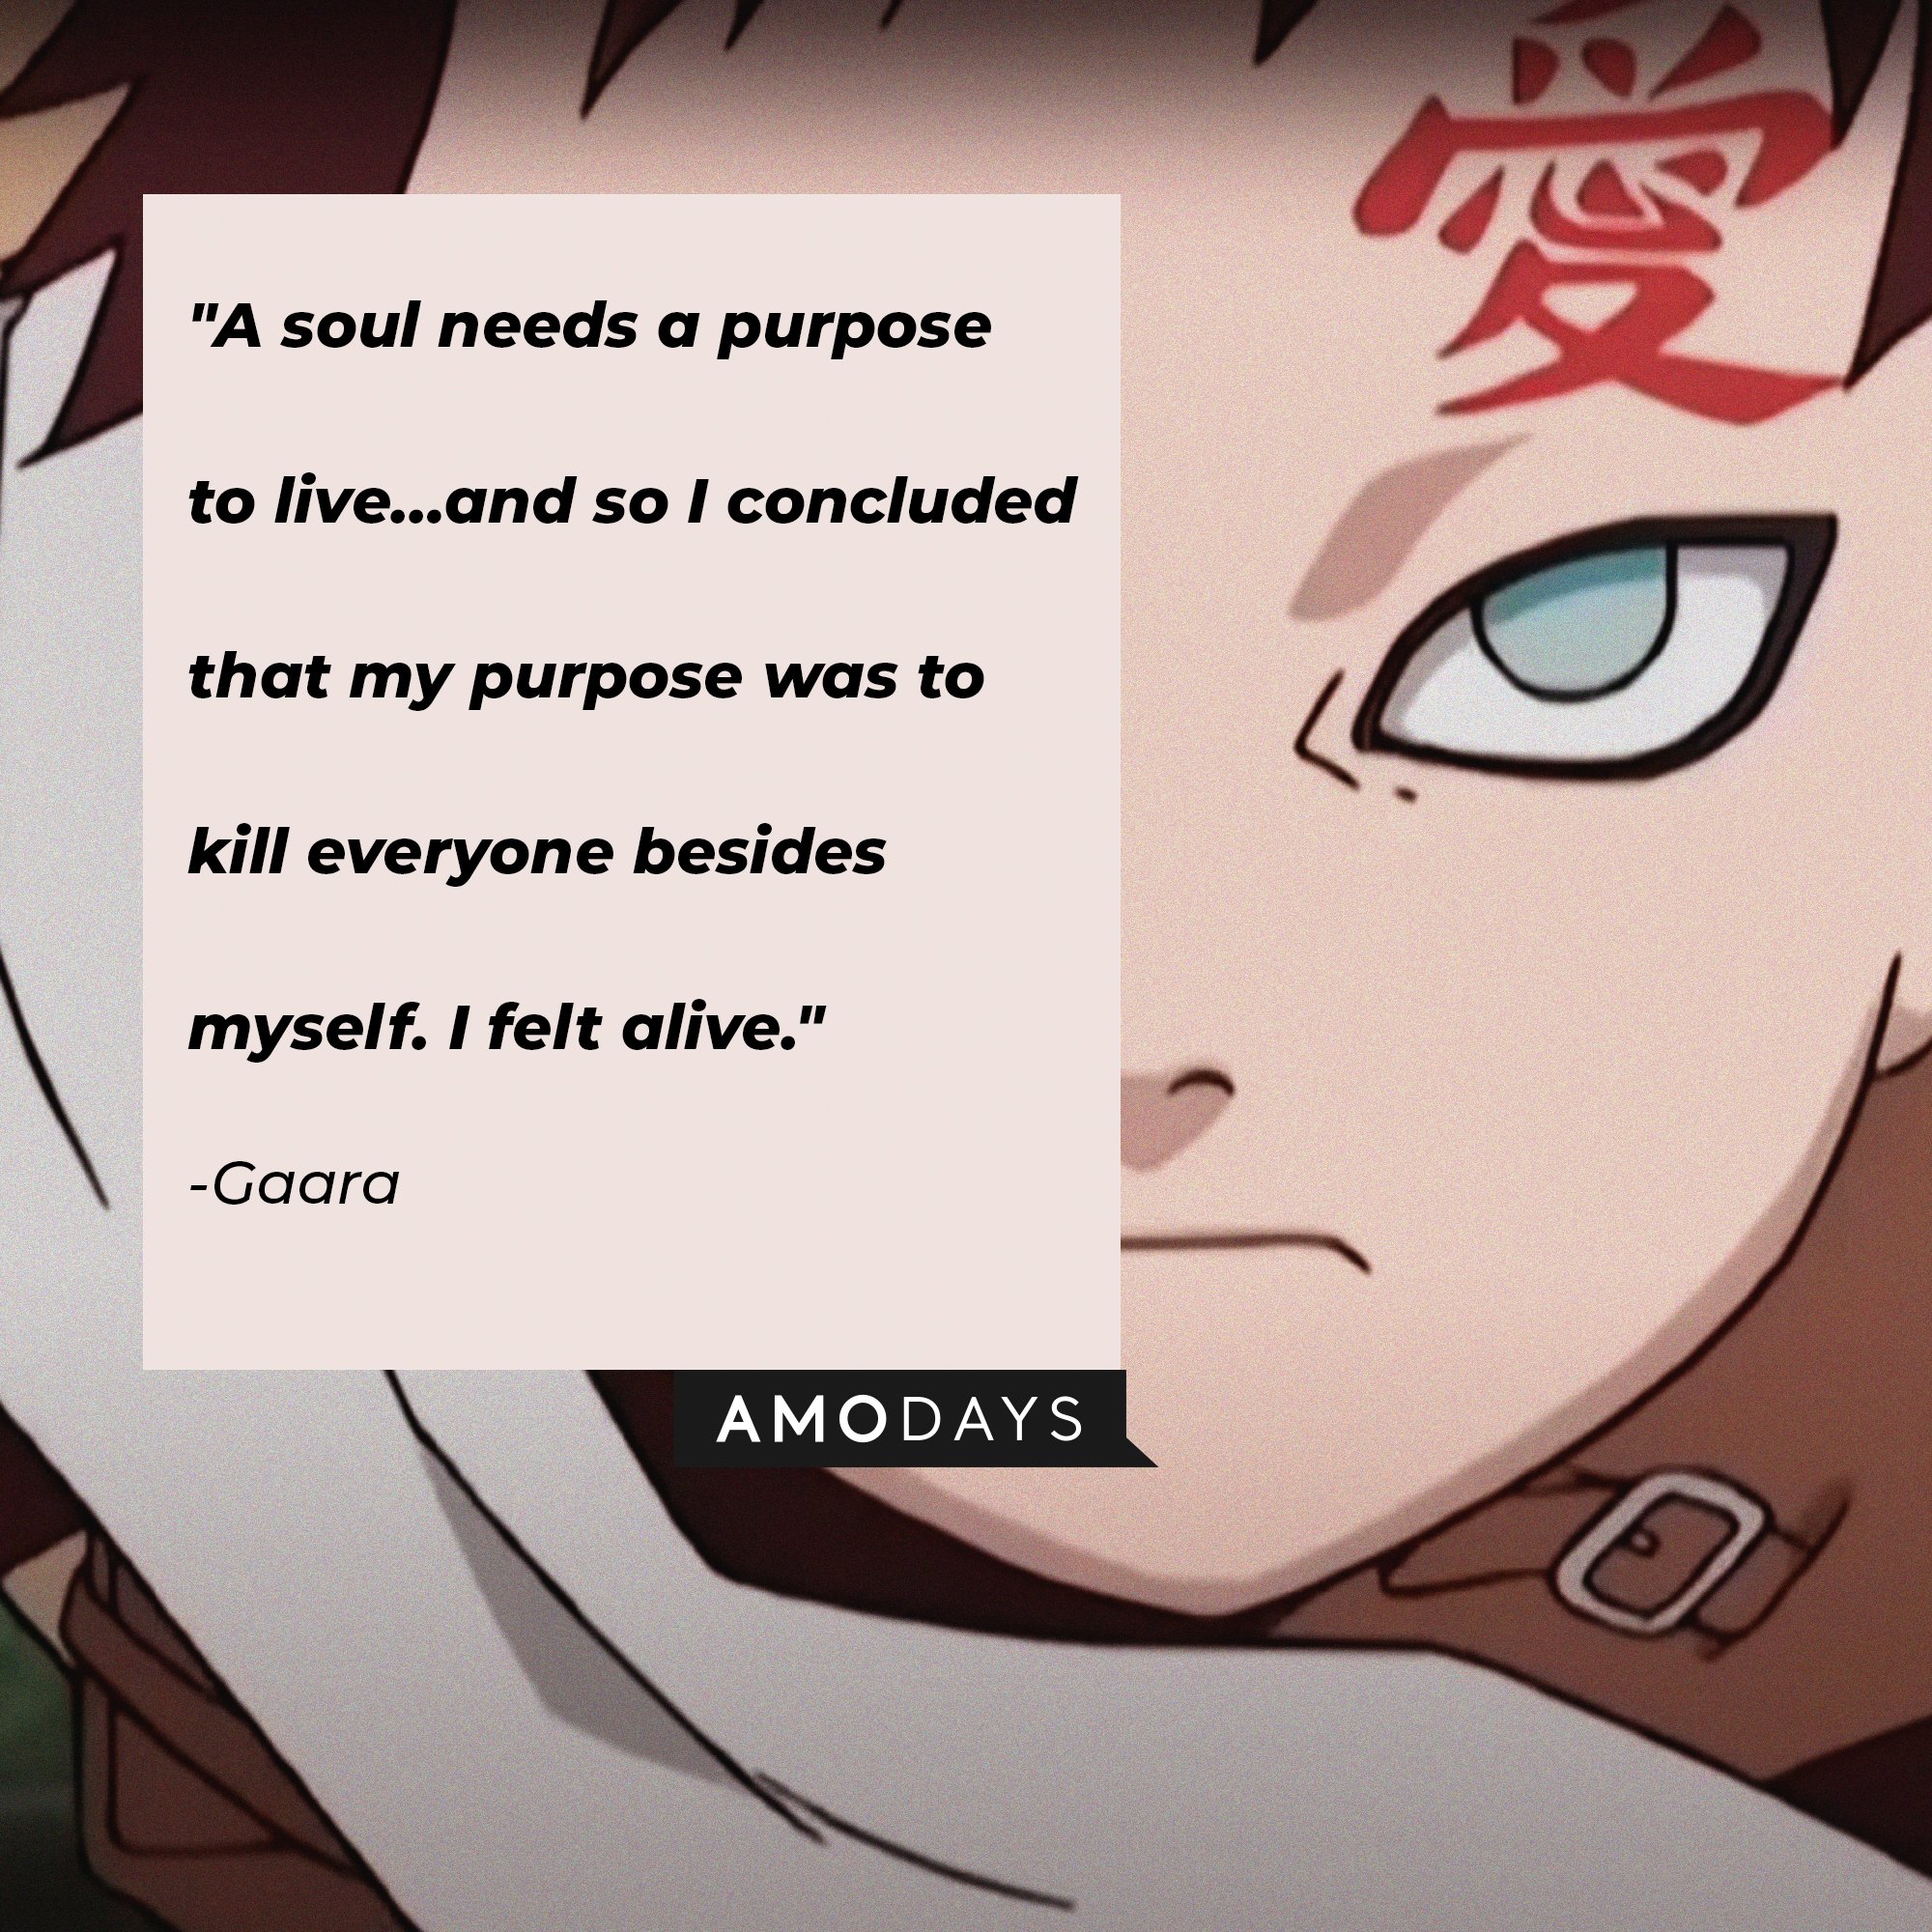 Gaara’s quote: "A soul needs a purpose to live…and so I concluded that my purpose was to kill everyone besides myself. I felt alive." | Image: AmoDays